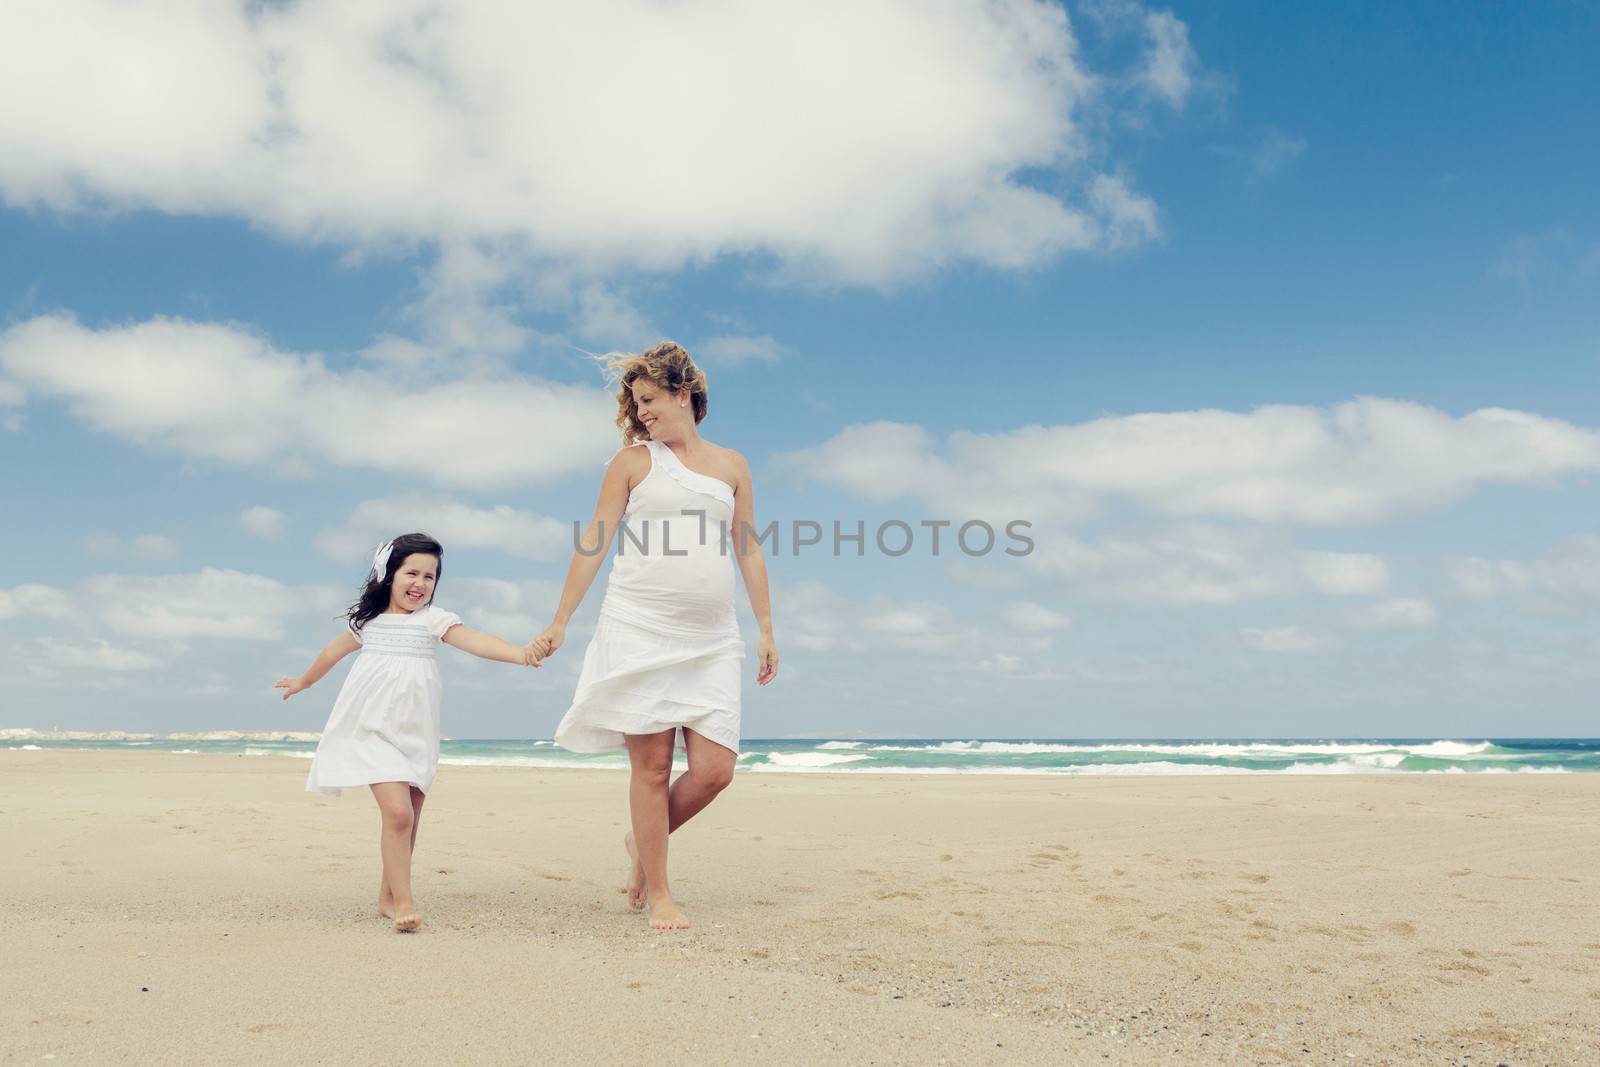 Beautiful pregnant woman and her little daughter walking on the beach